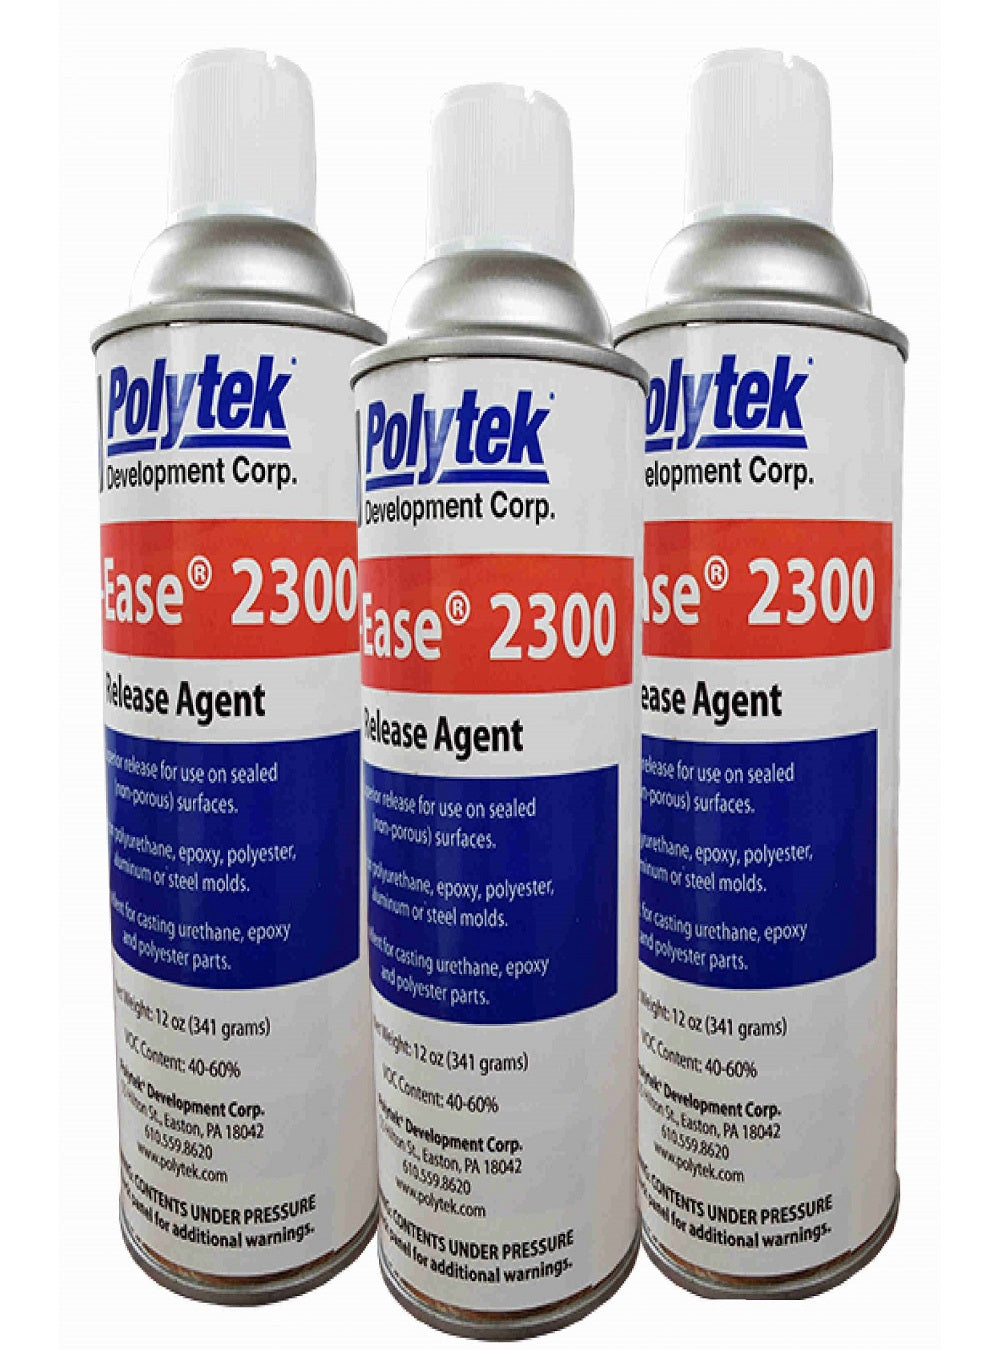 Pol-Ease® 2300 Release Agent